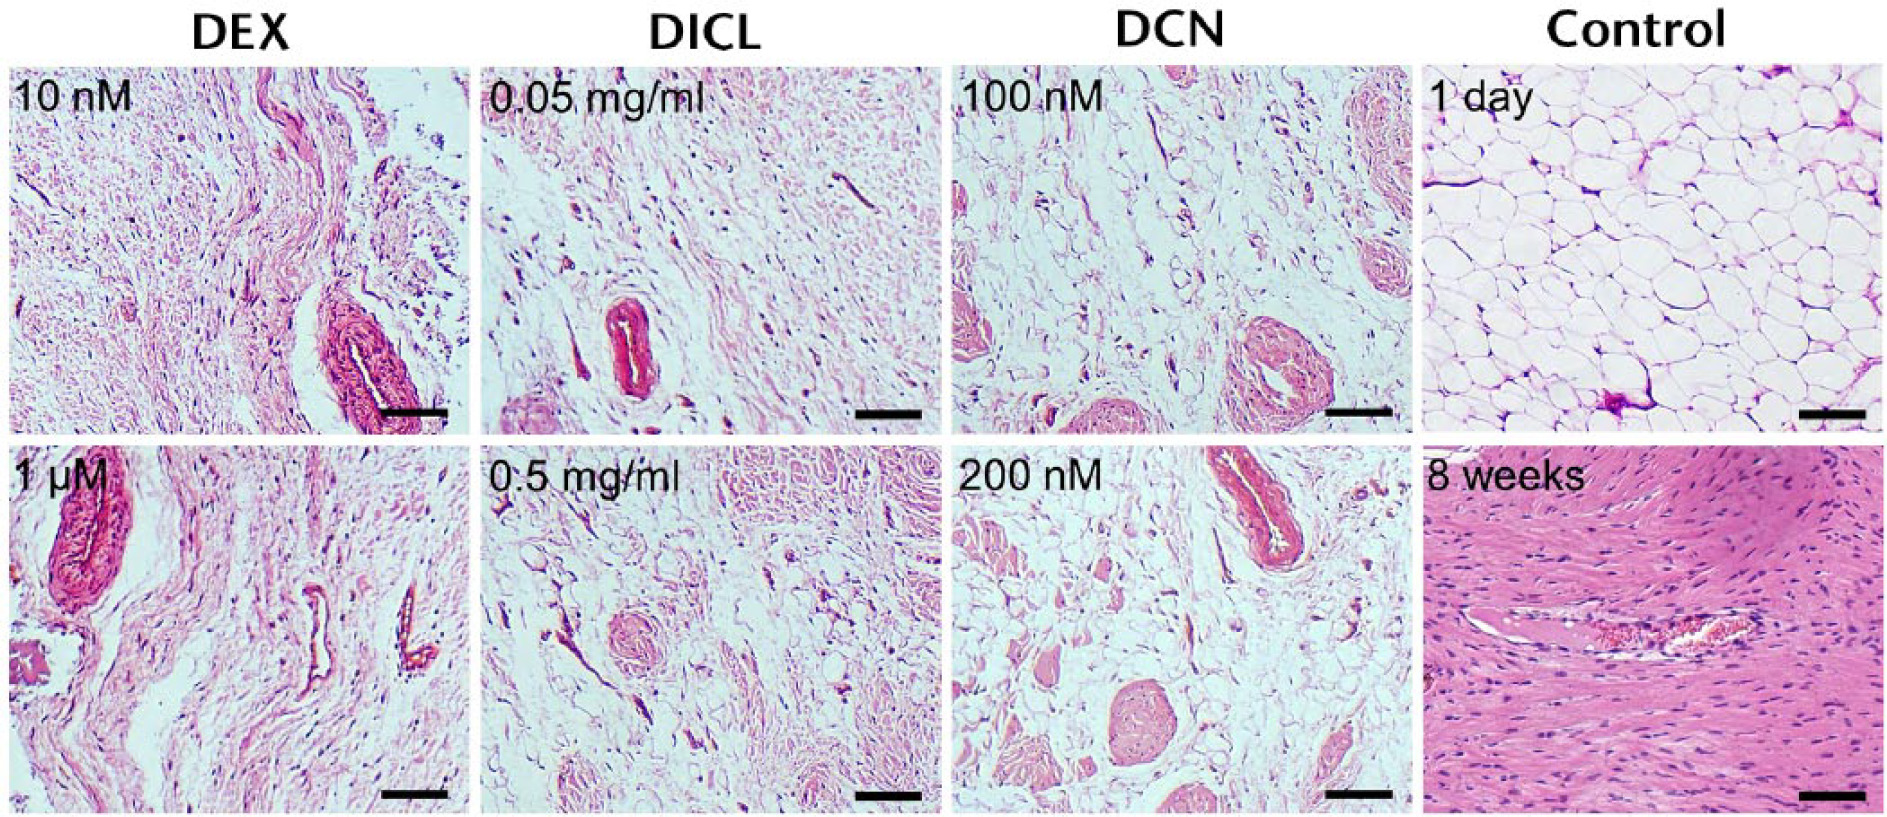 Fig. 6 
            Histological analysis of infrapatellar fat pad of the joints in different groups. The specimens in control group harvested after one day and eight weeks served as negative and positive controls, respectively (stain, hematoxylin, and eosin). DEX, dexamethasone; DICL, diclofenac; DCN, decorin. Scale bar = 200 μM.
          